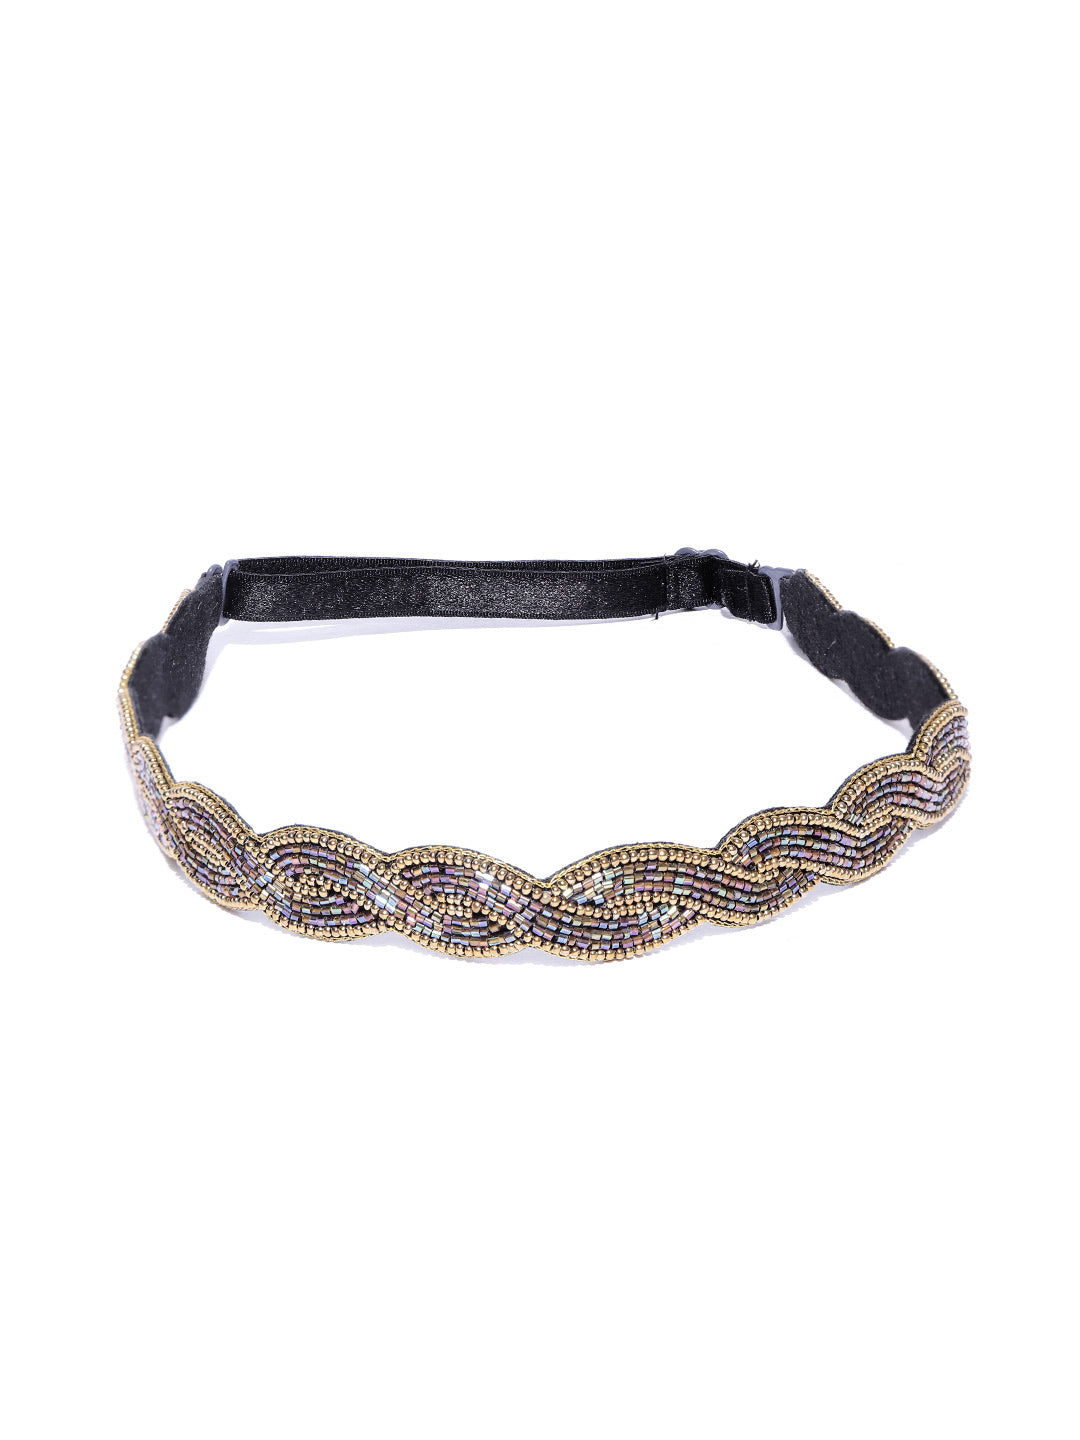 Blueberry multi glass bead embellished hair band